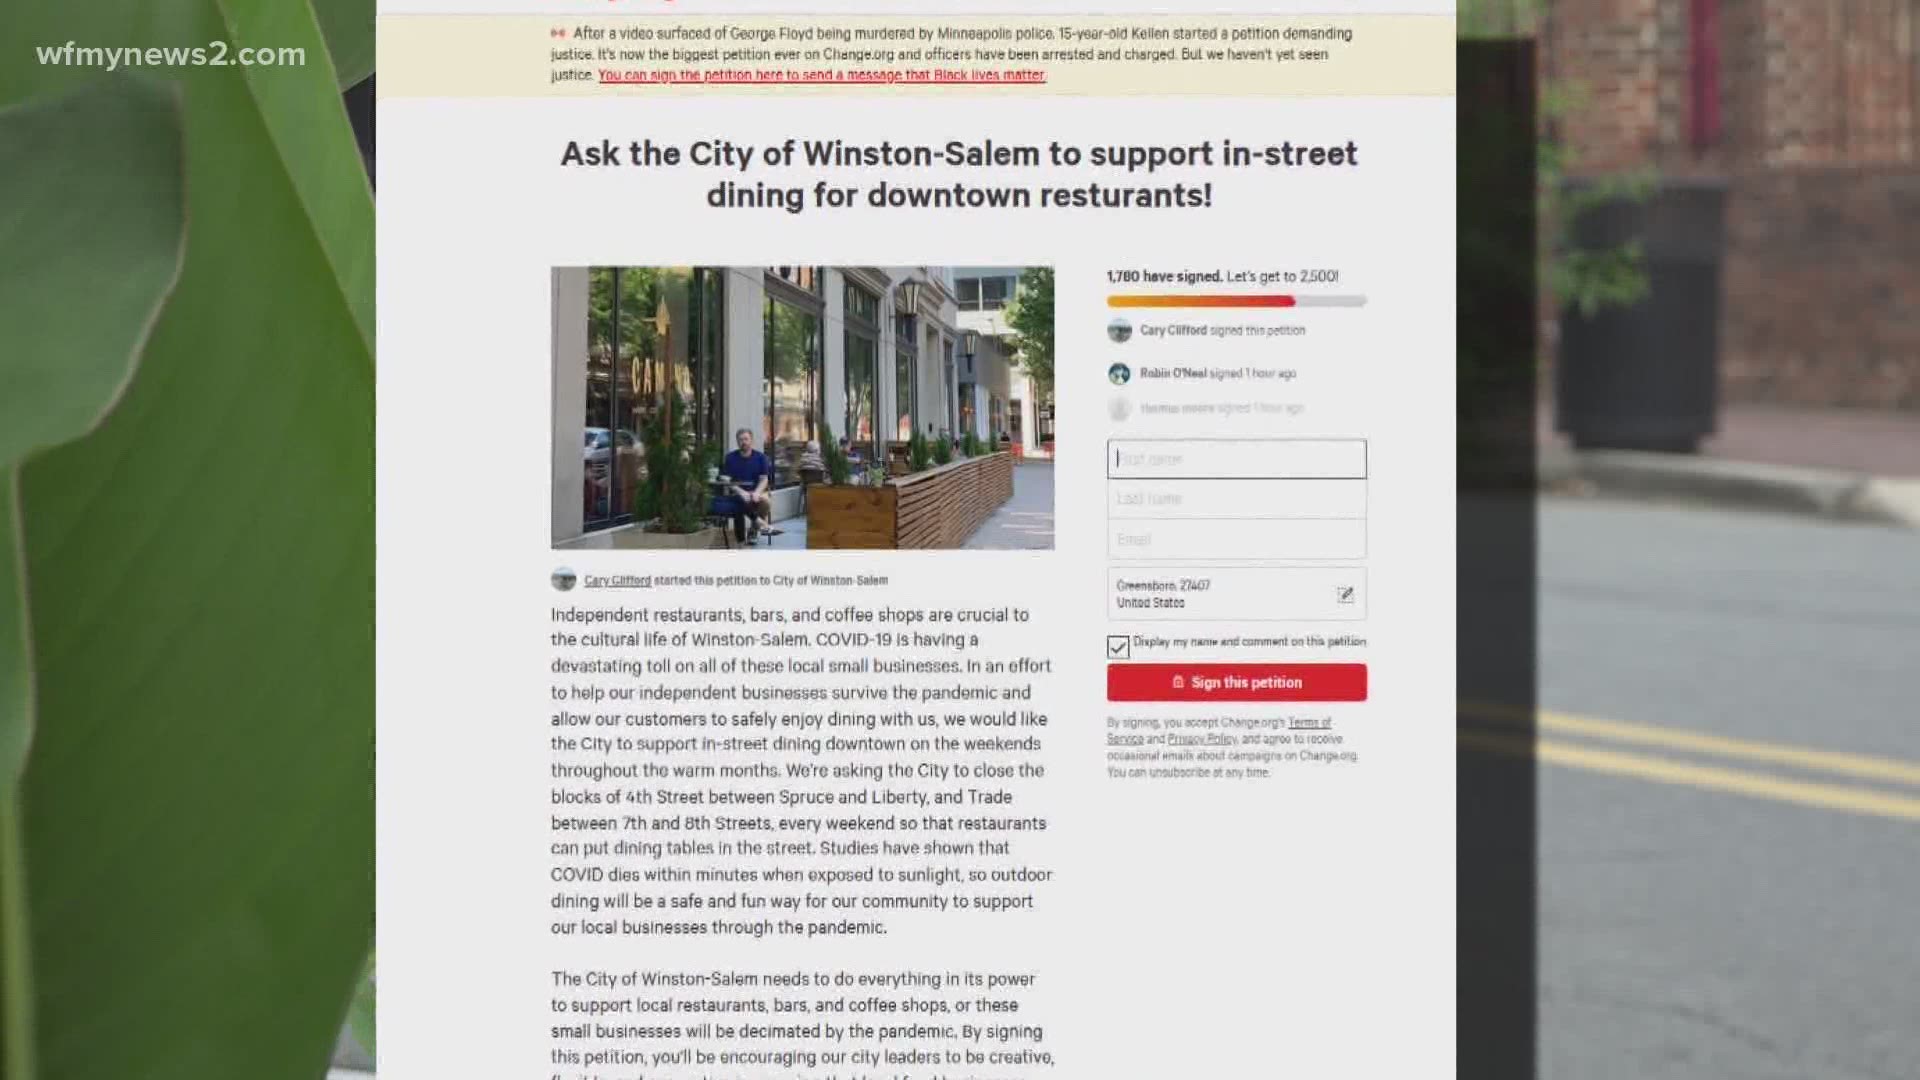 The petition wants local restaurants to have the choice to apply for more outdoor seating that would shut down streets to allow for social distancing.